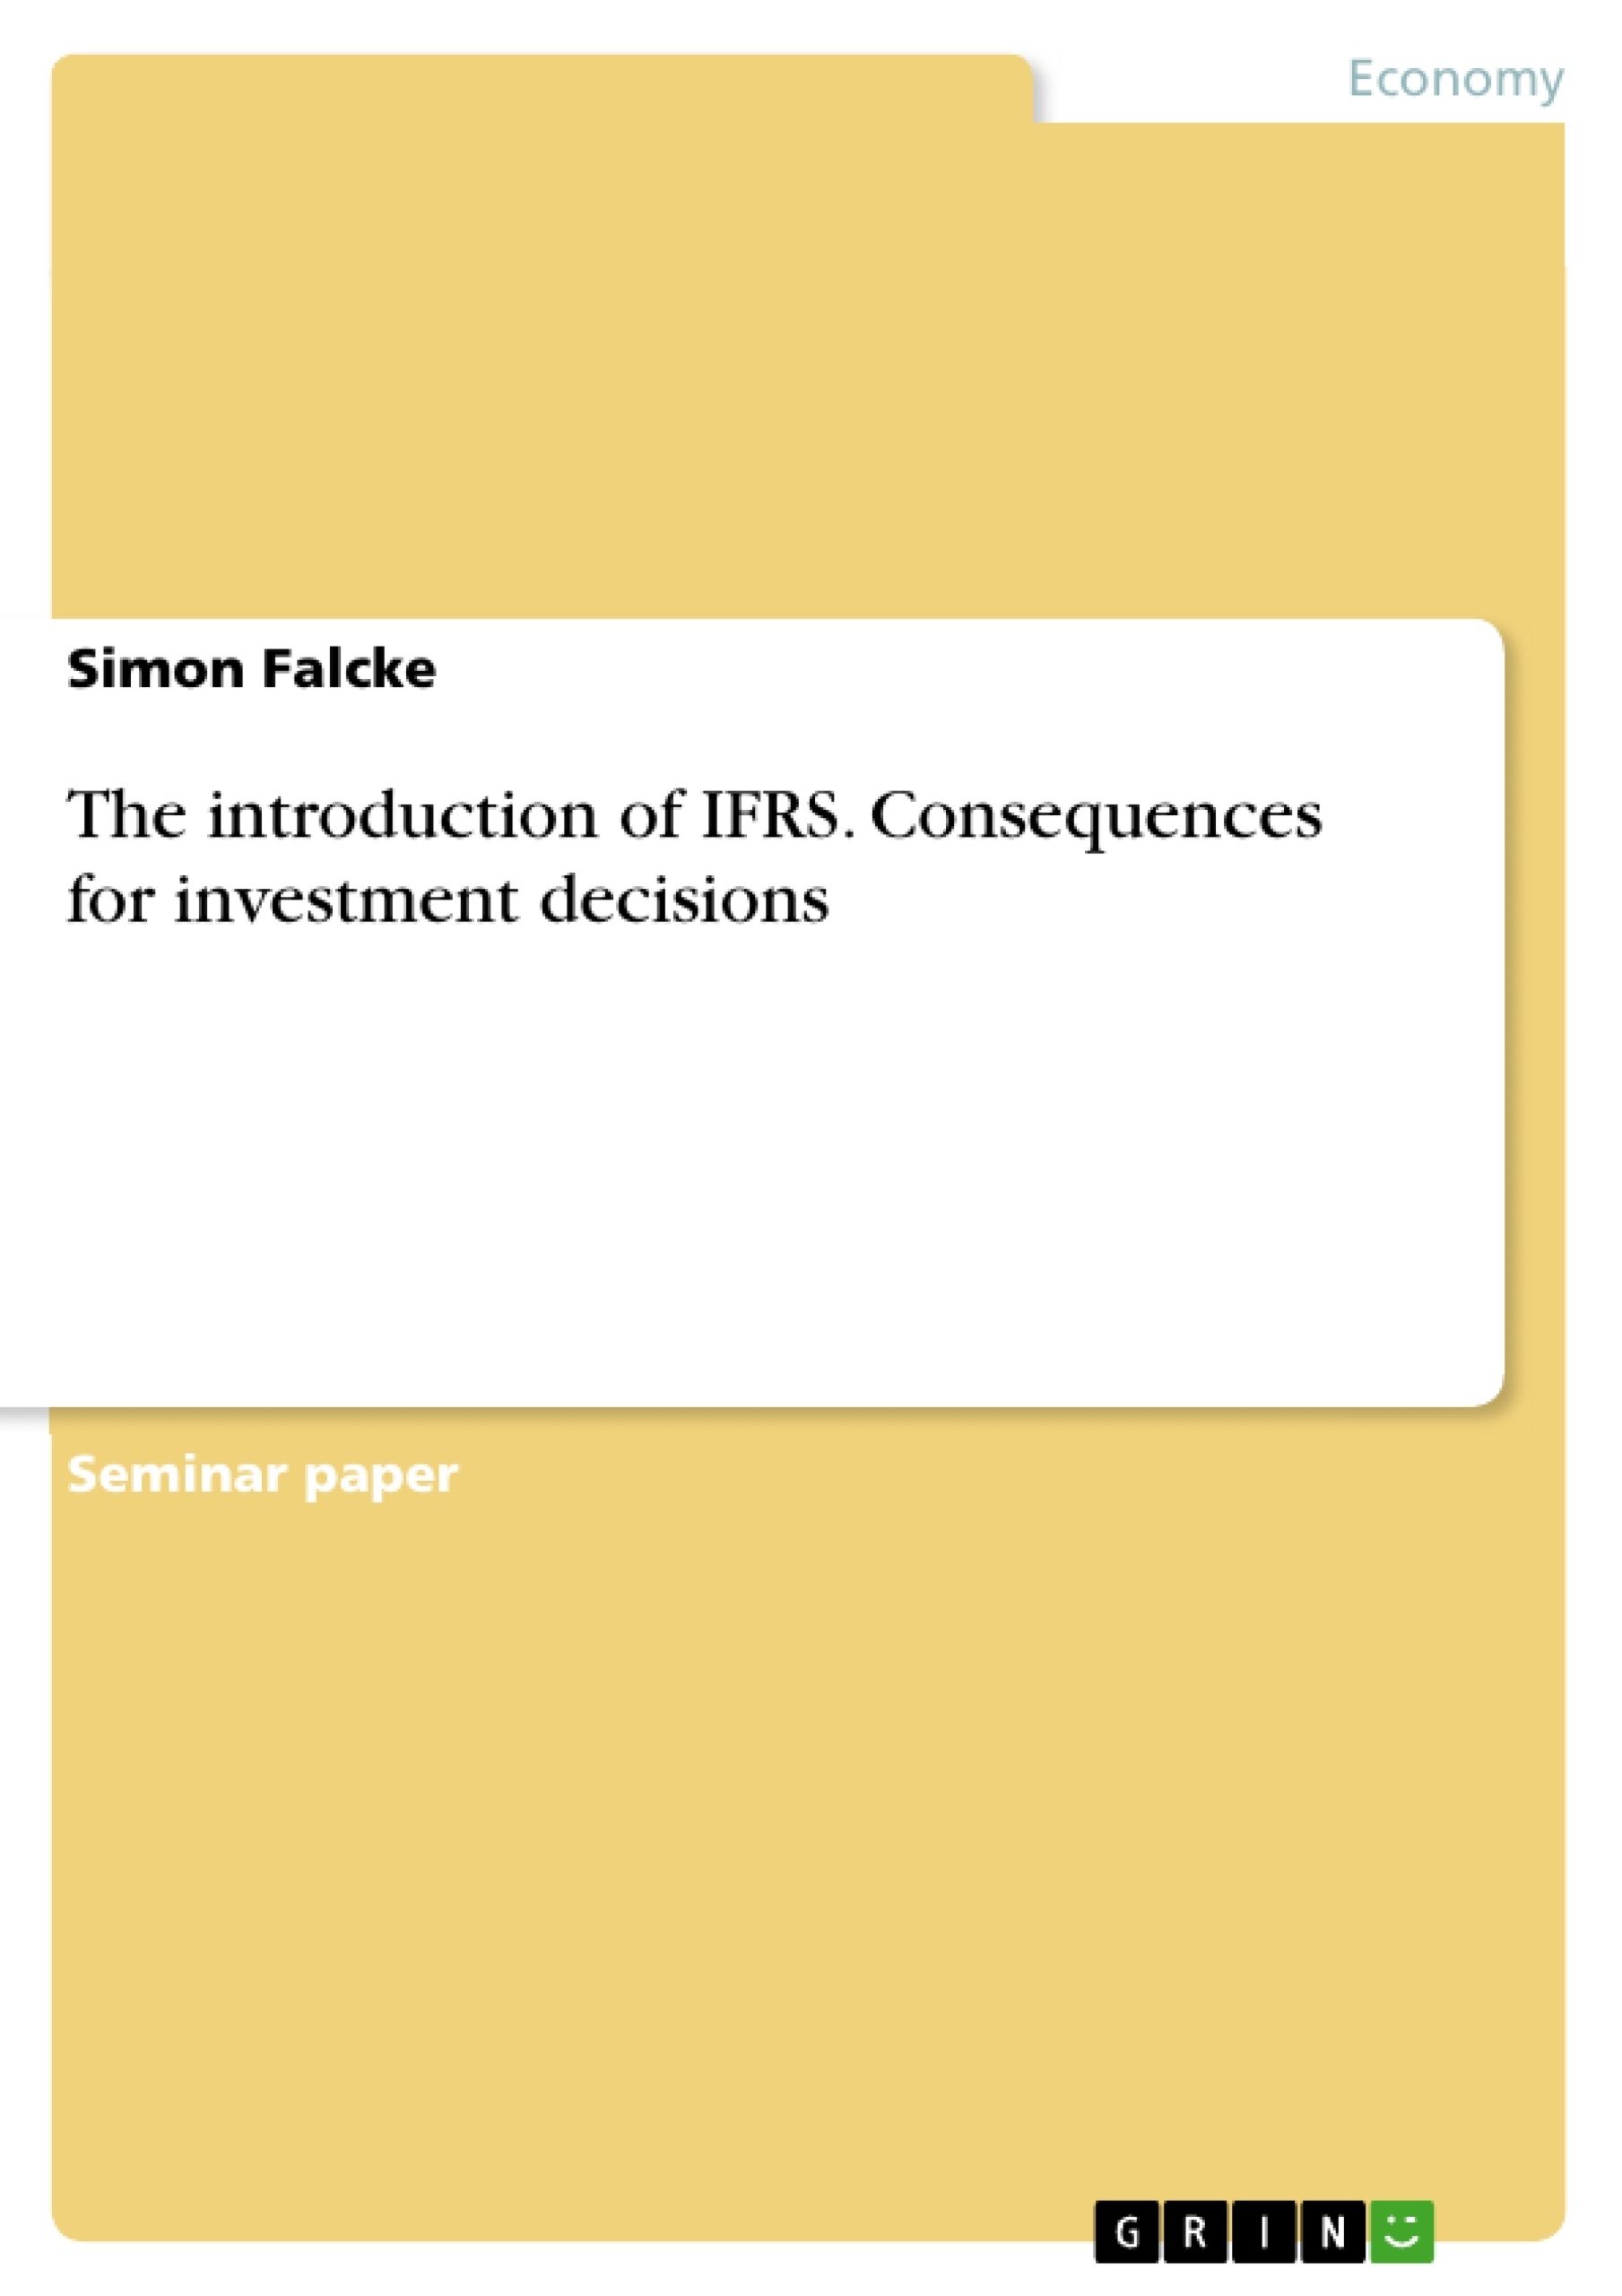 Title: The introduction of IFRS. Consequences for investment decisions